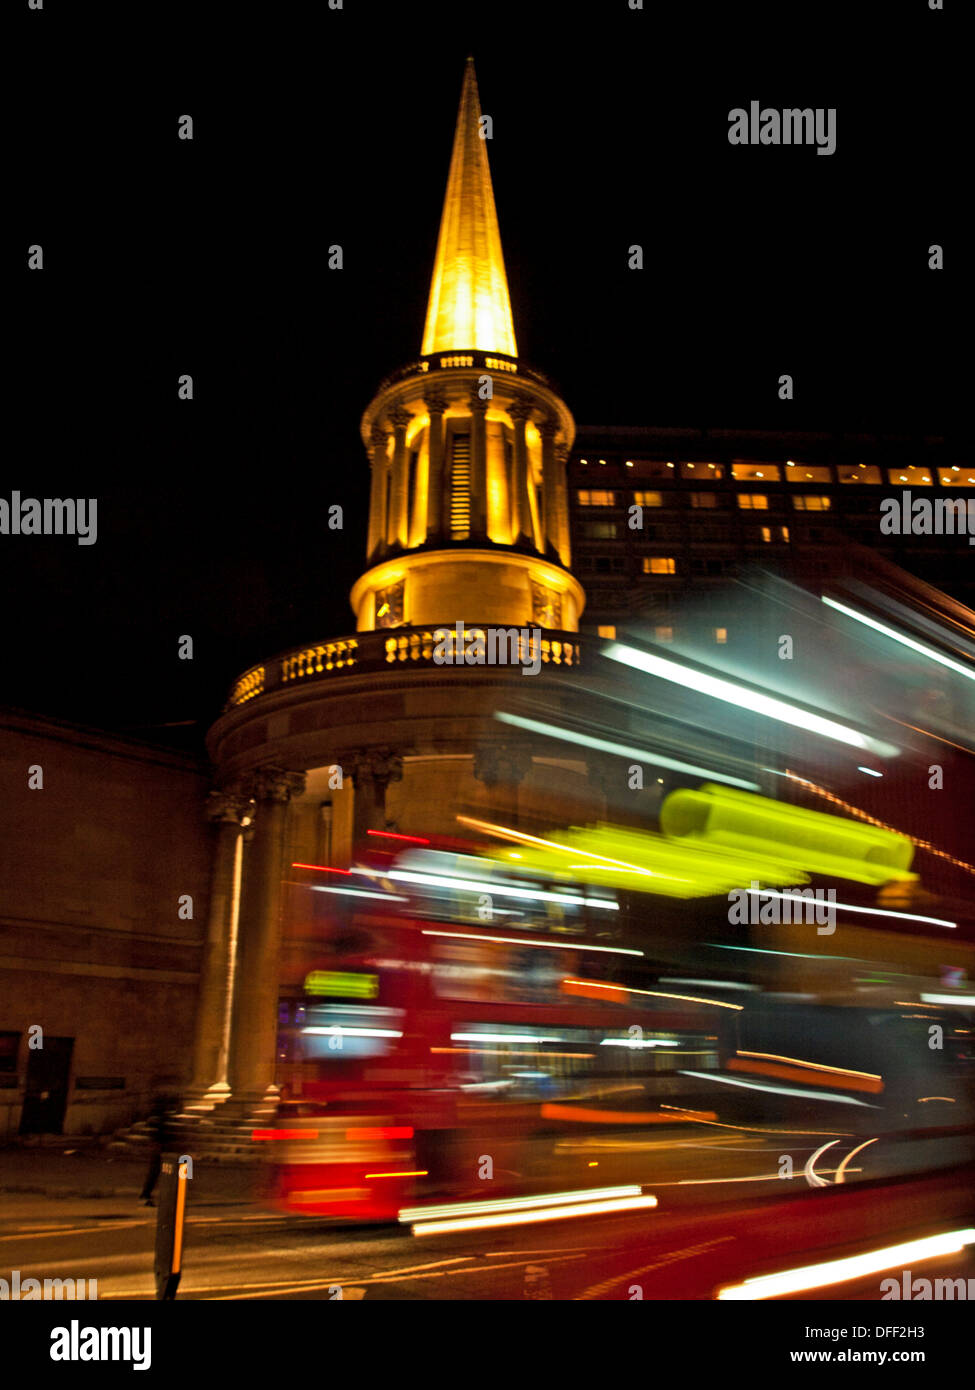 Double-decker buses in transit showing All Souls Church at night, Langham Place, London, England, United Kingdom Stock Photo